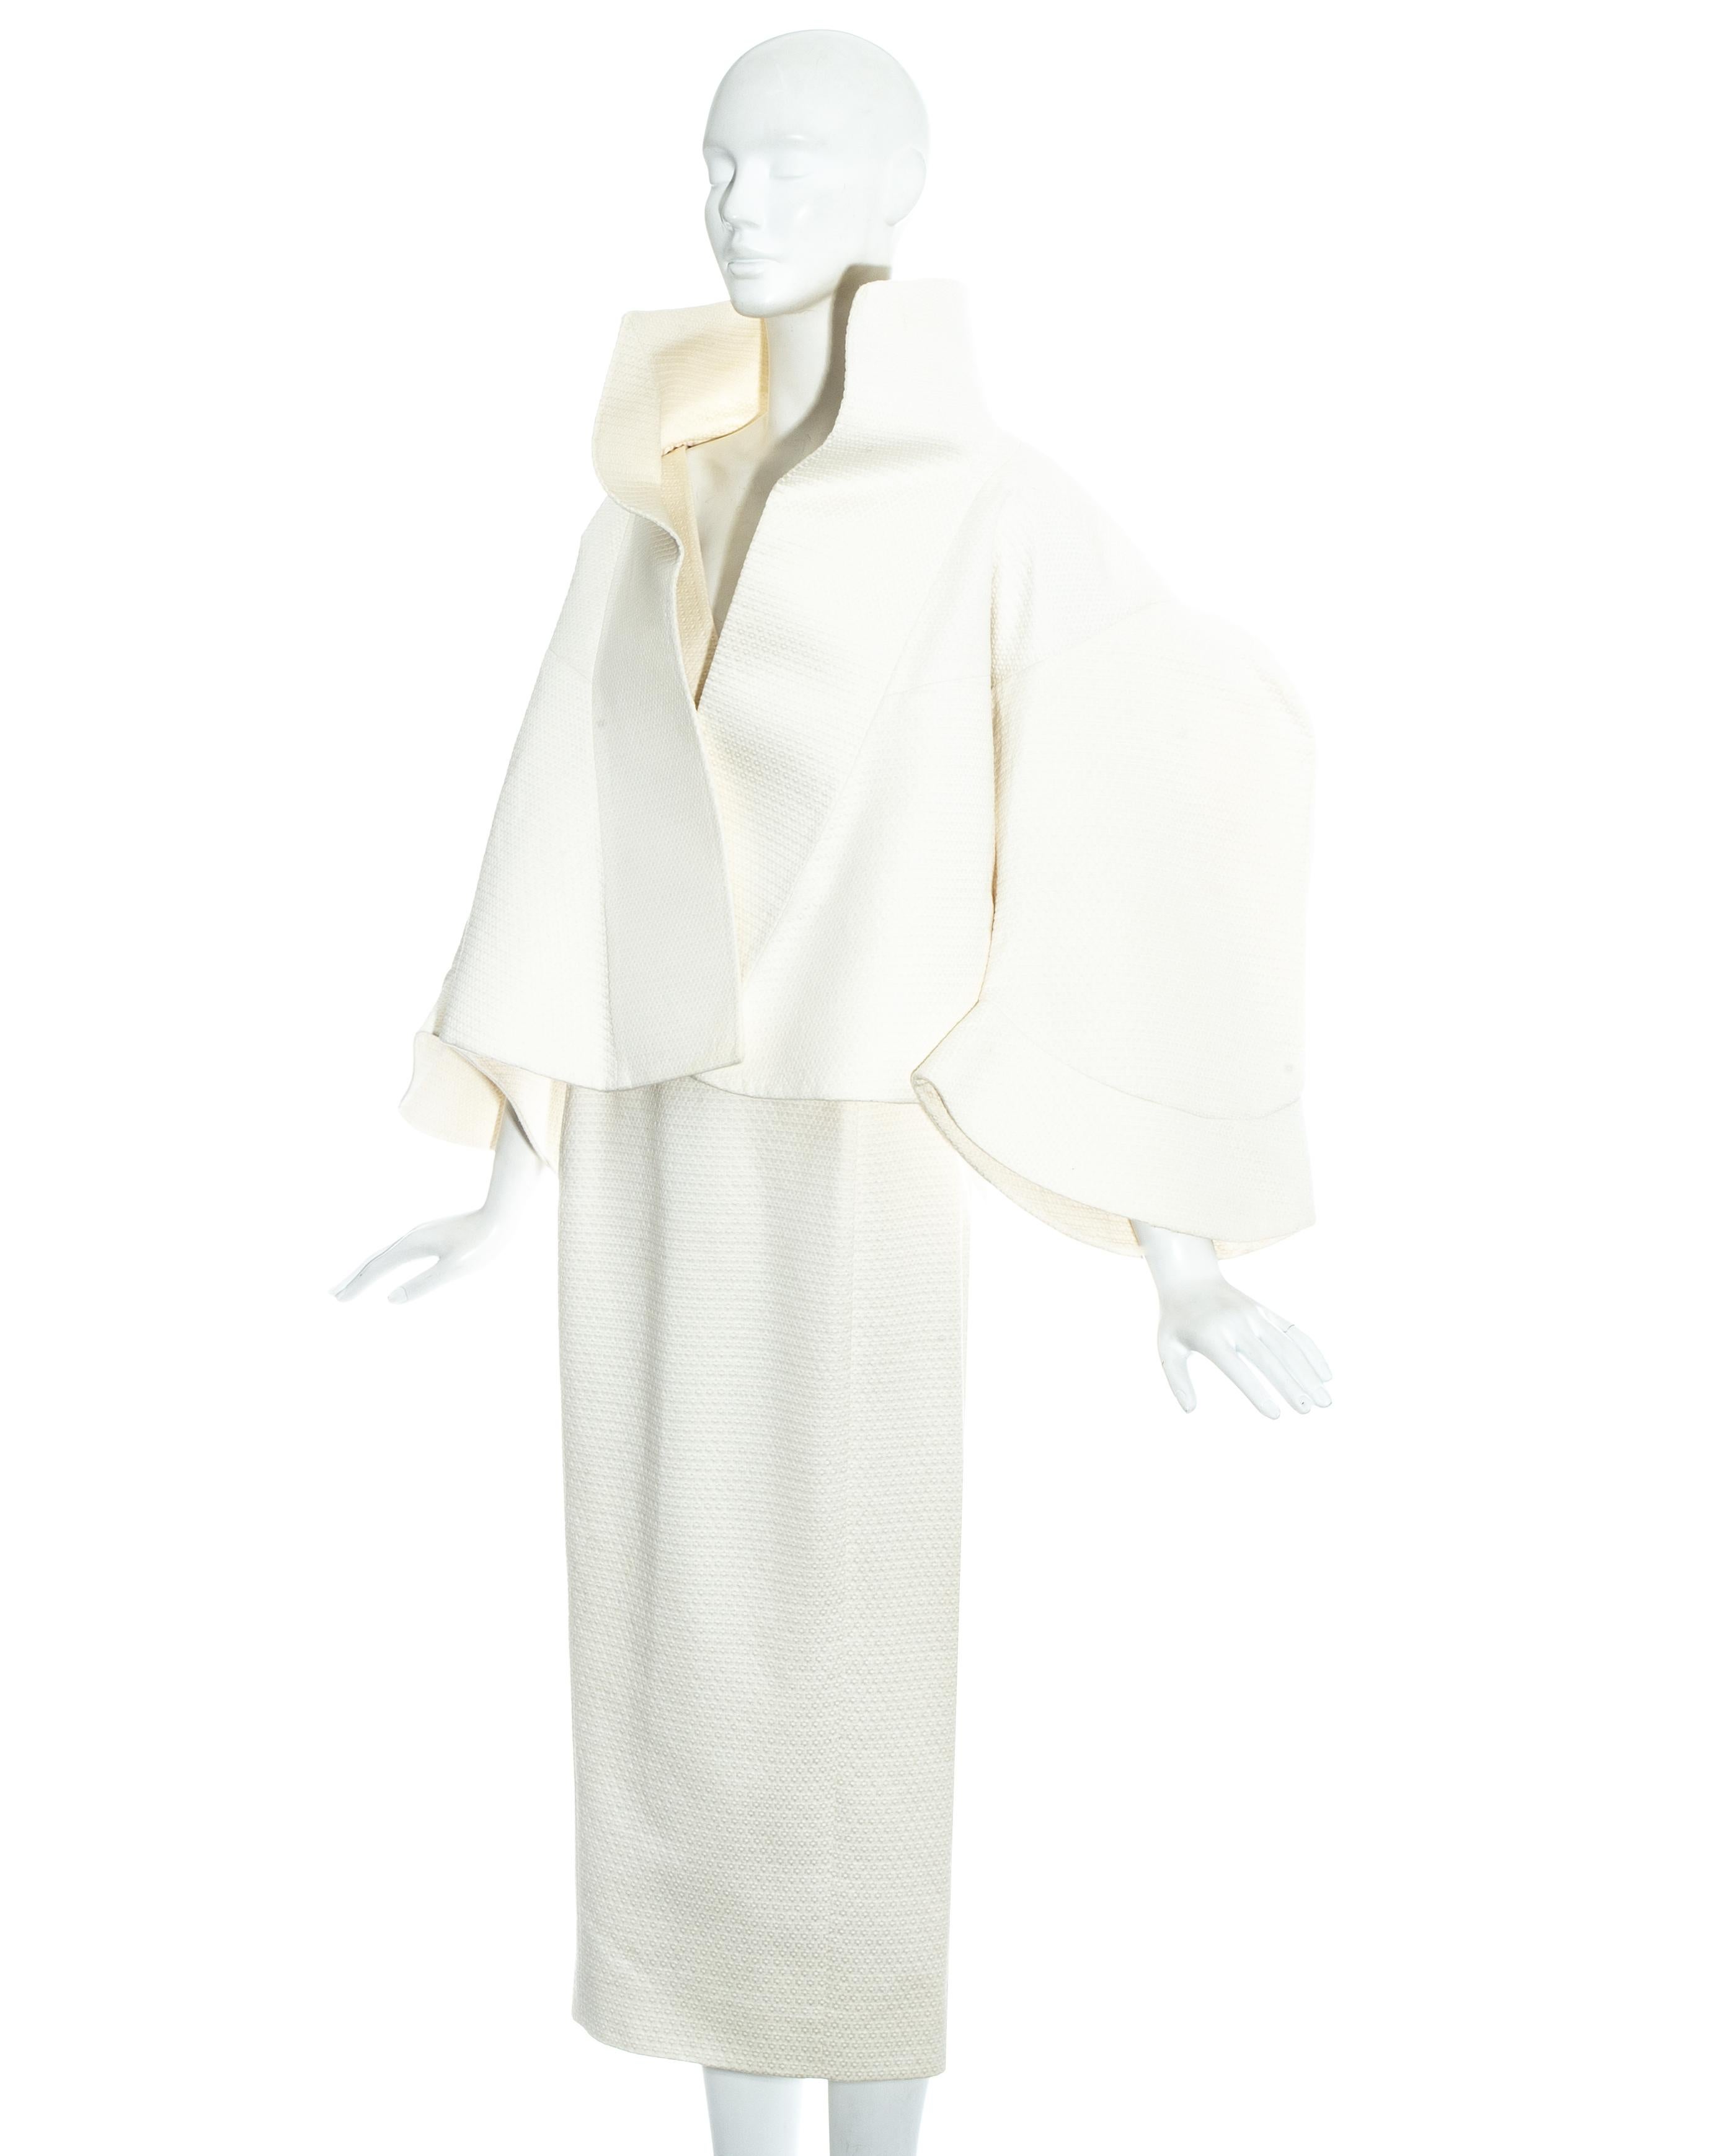 John Galliano; white cotton jacker and dress ensemble. Oversized structured cropped jacket with standing collar and bell sleeves. Fitted mid-length dress with v-neck cleavage. 

Spring-Summer 1995